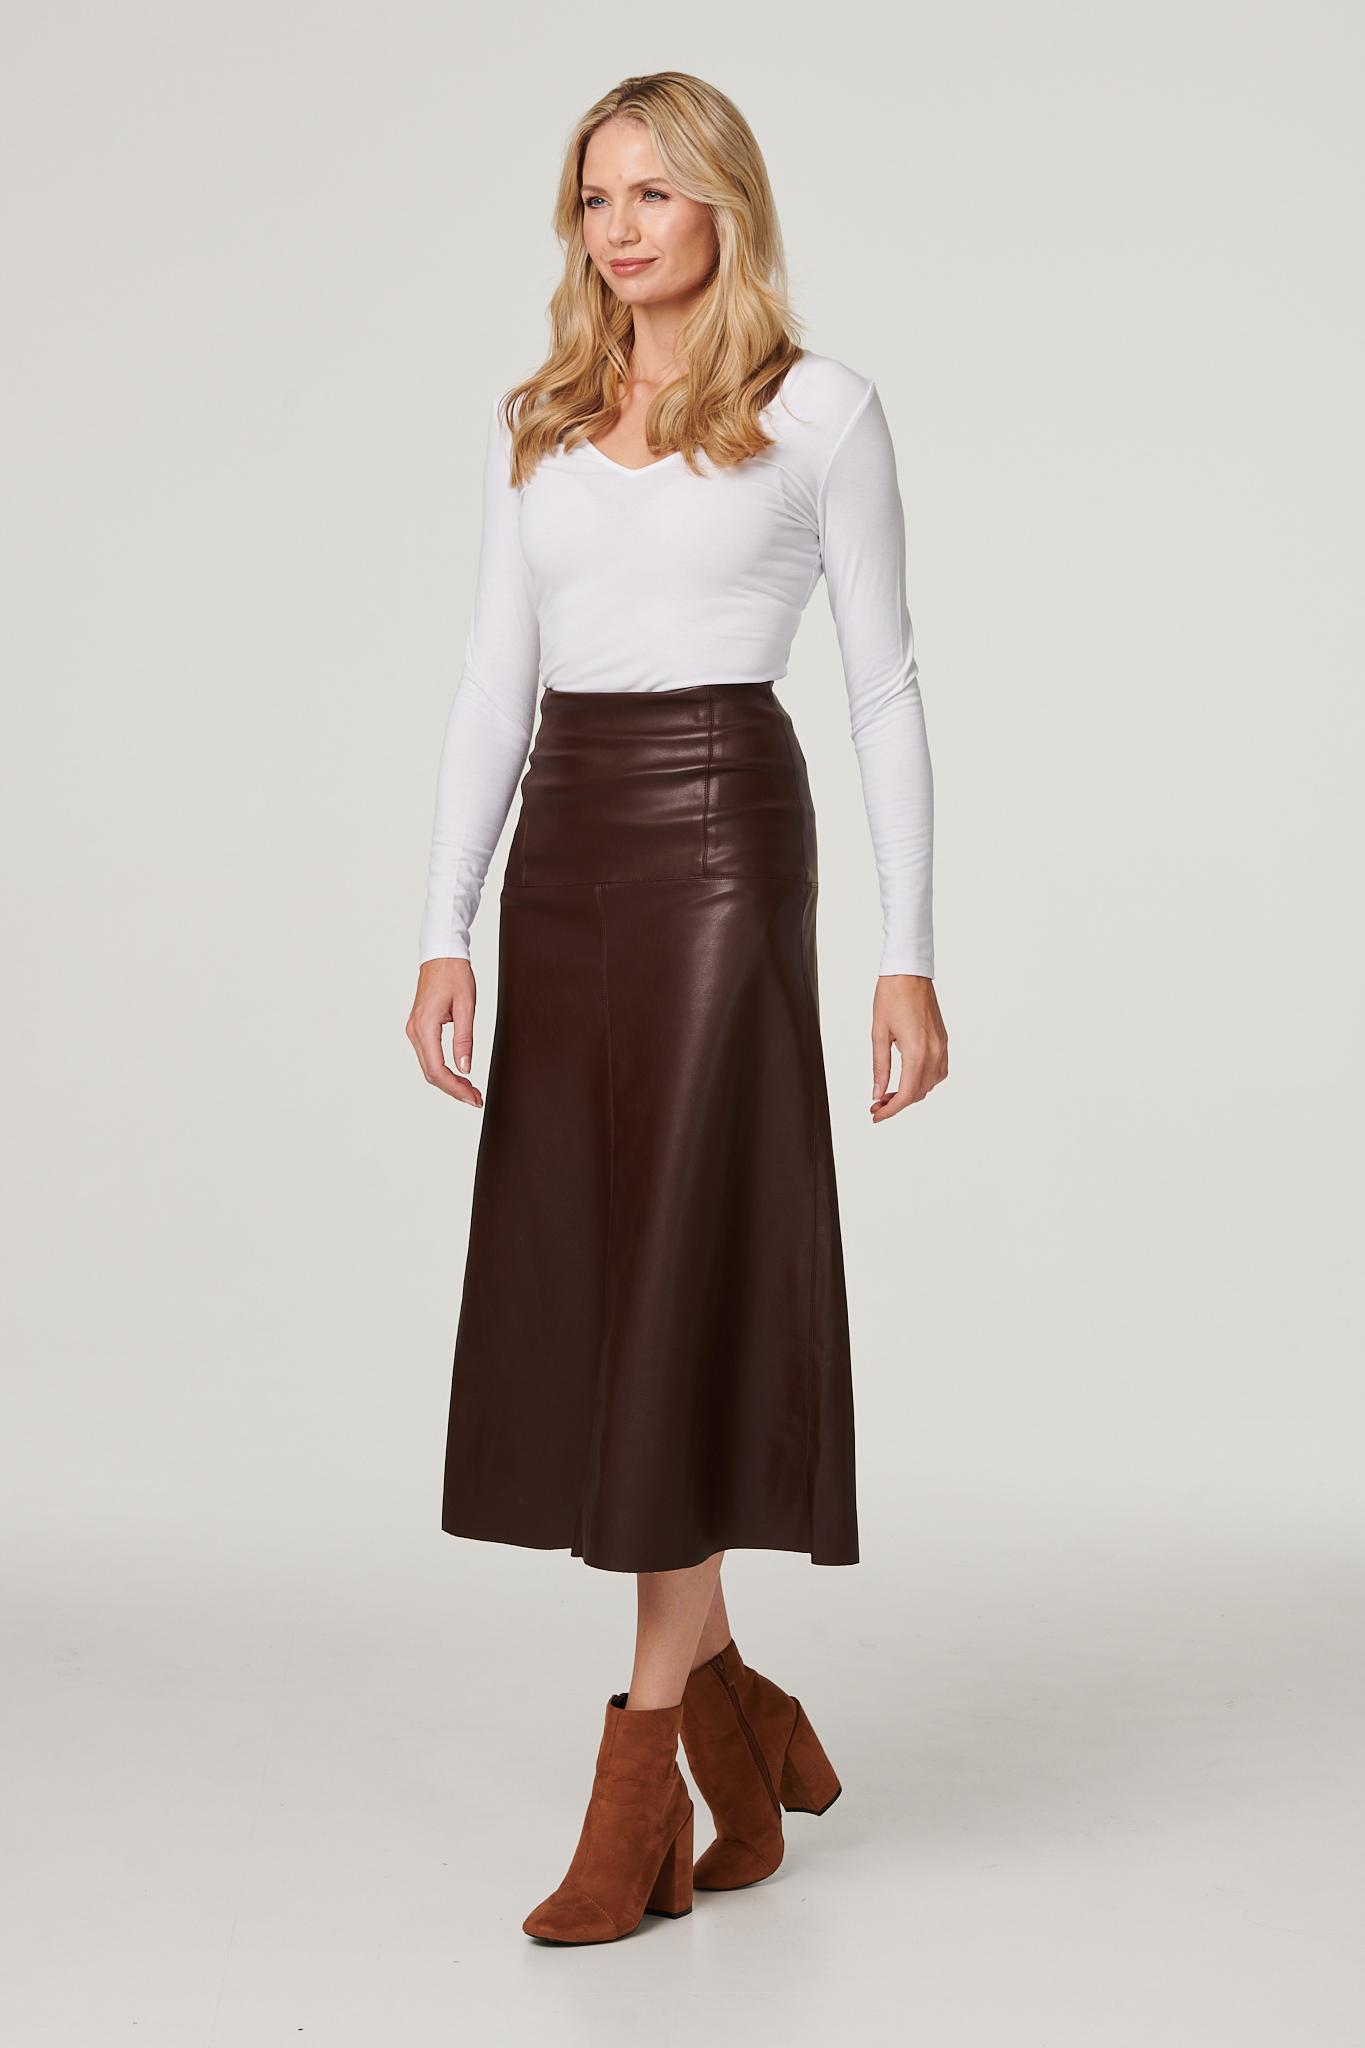 Brown | Faux Leather High Waist Midi Skirt : Model is 5'10"/178 cm and wears UK10/EU38/US6/AUS10